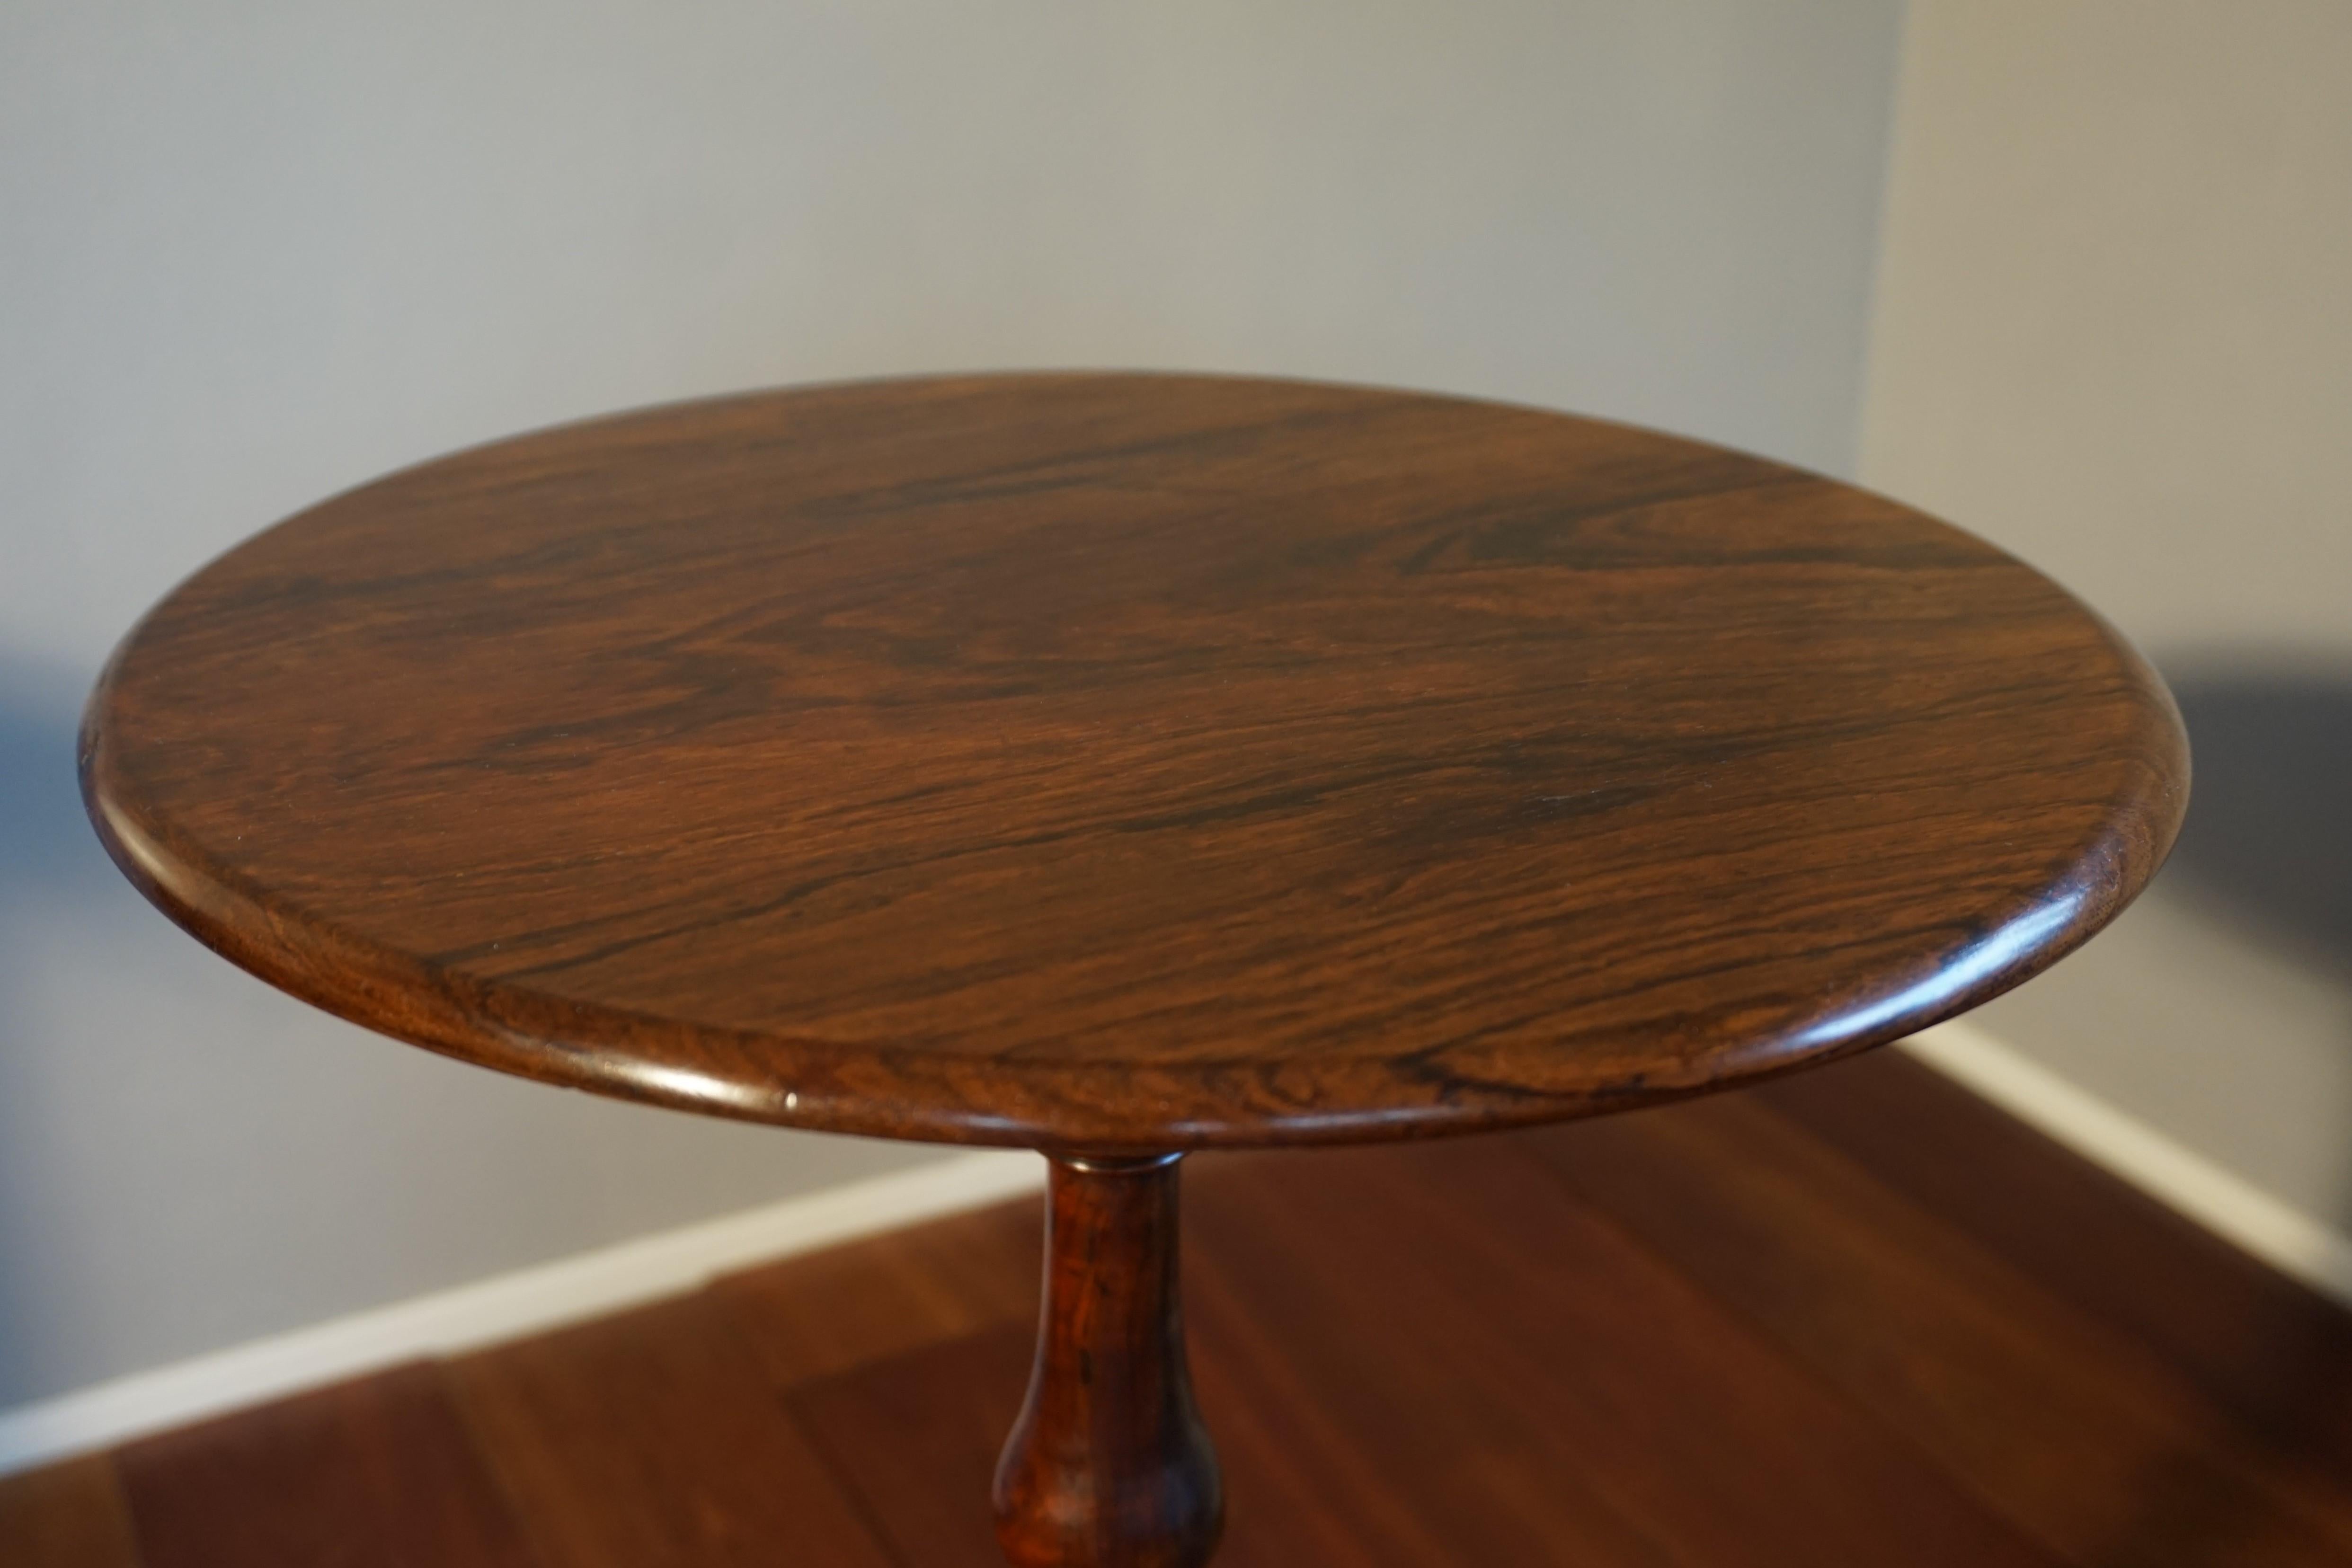 George IV Stunning Early 1800s Georgian Tripod Wine Table / End Table with Amazing Patina